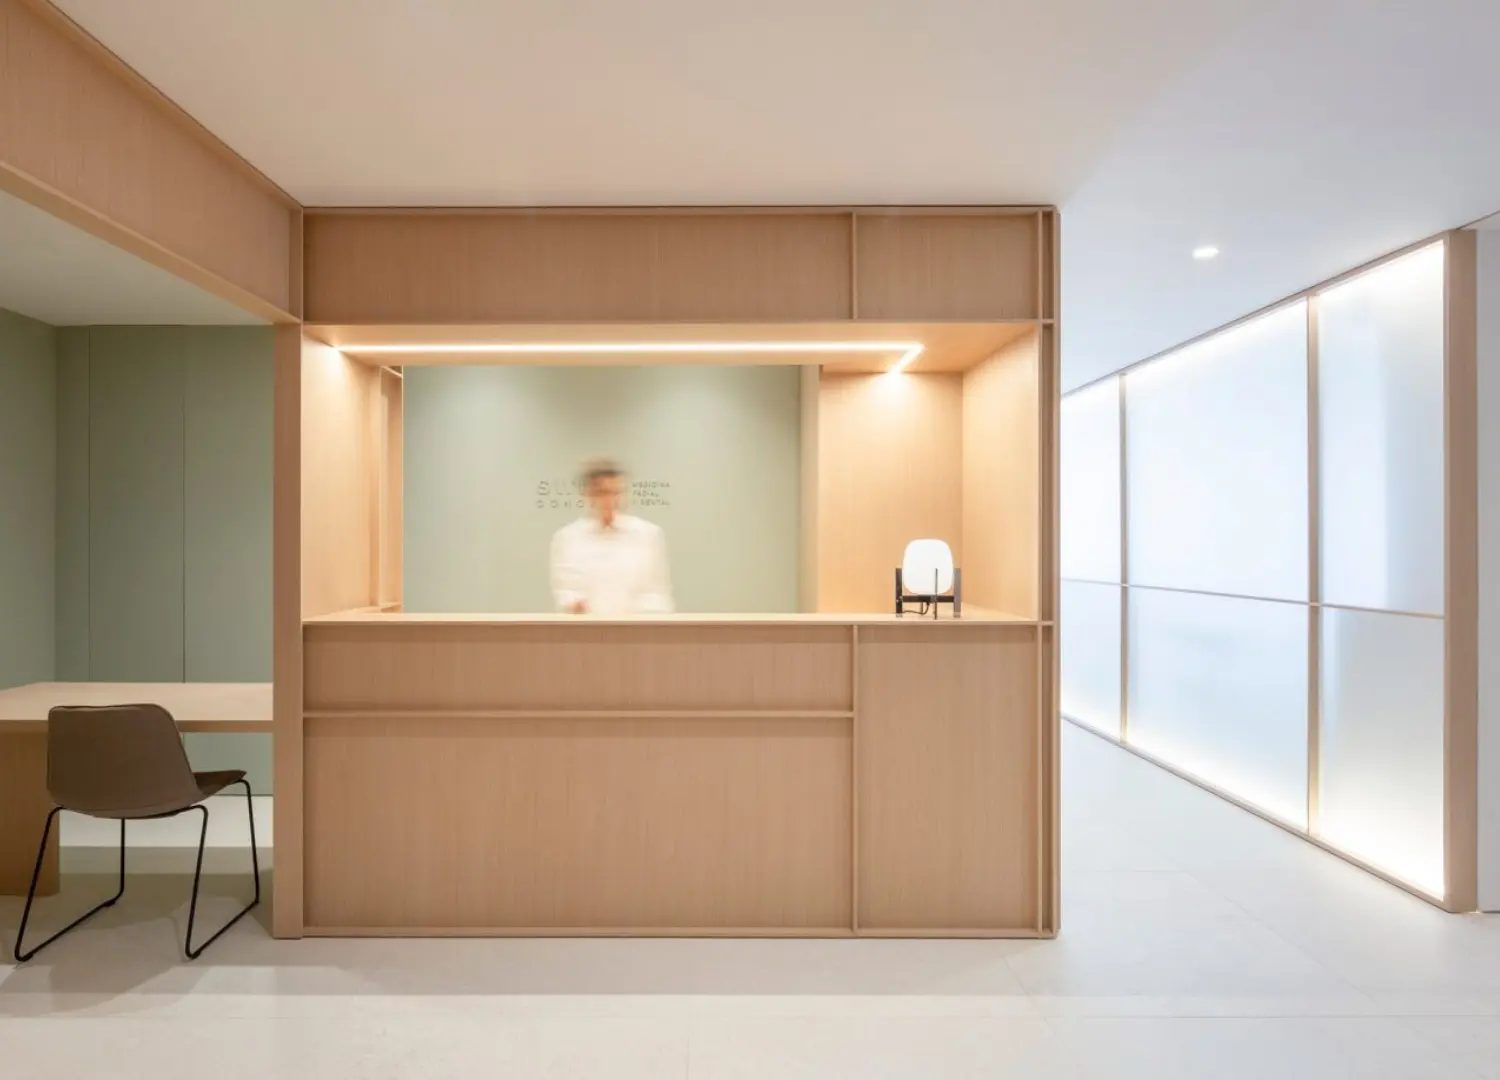 Francesc Rifé Studio for Swiss Concept / Nothing like your ordinary dental clinics - step inside these 5 spaces